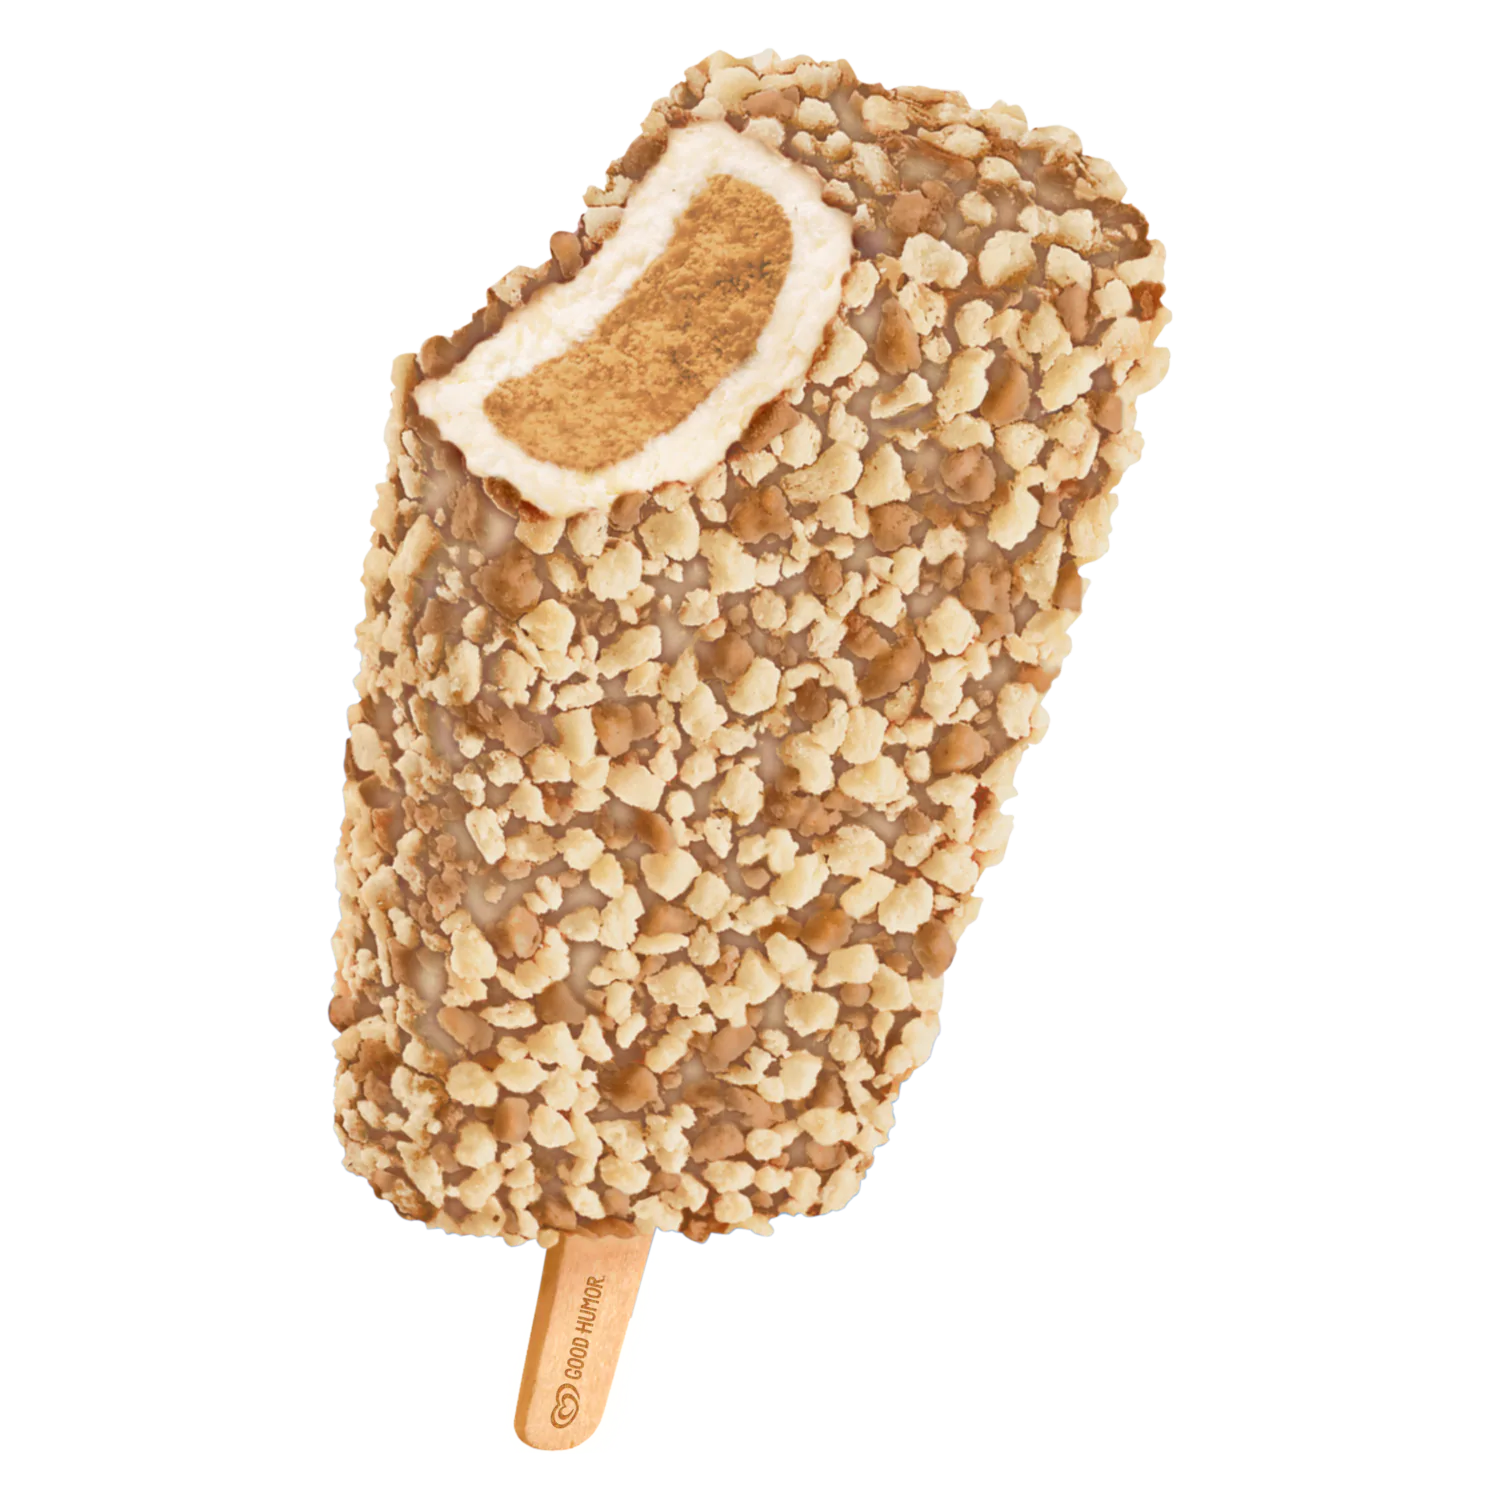 Ice Pop Stick PNG Image Background